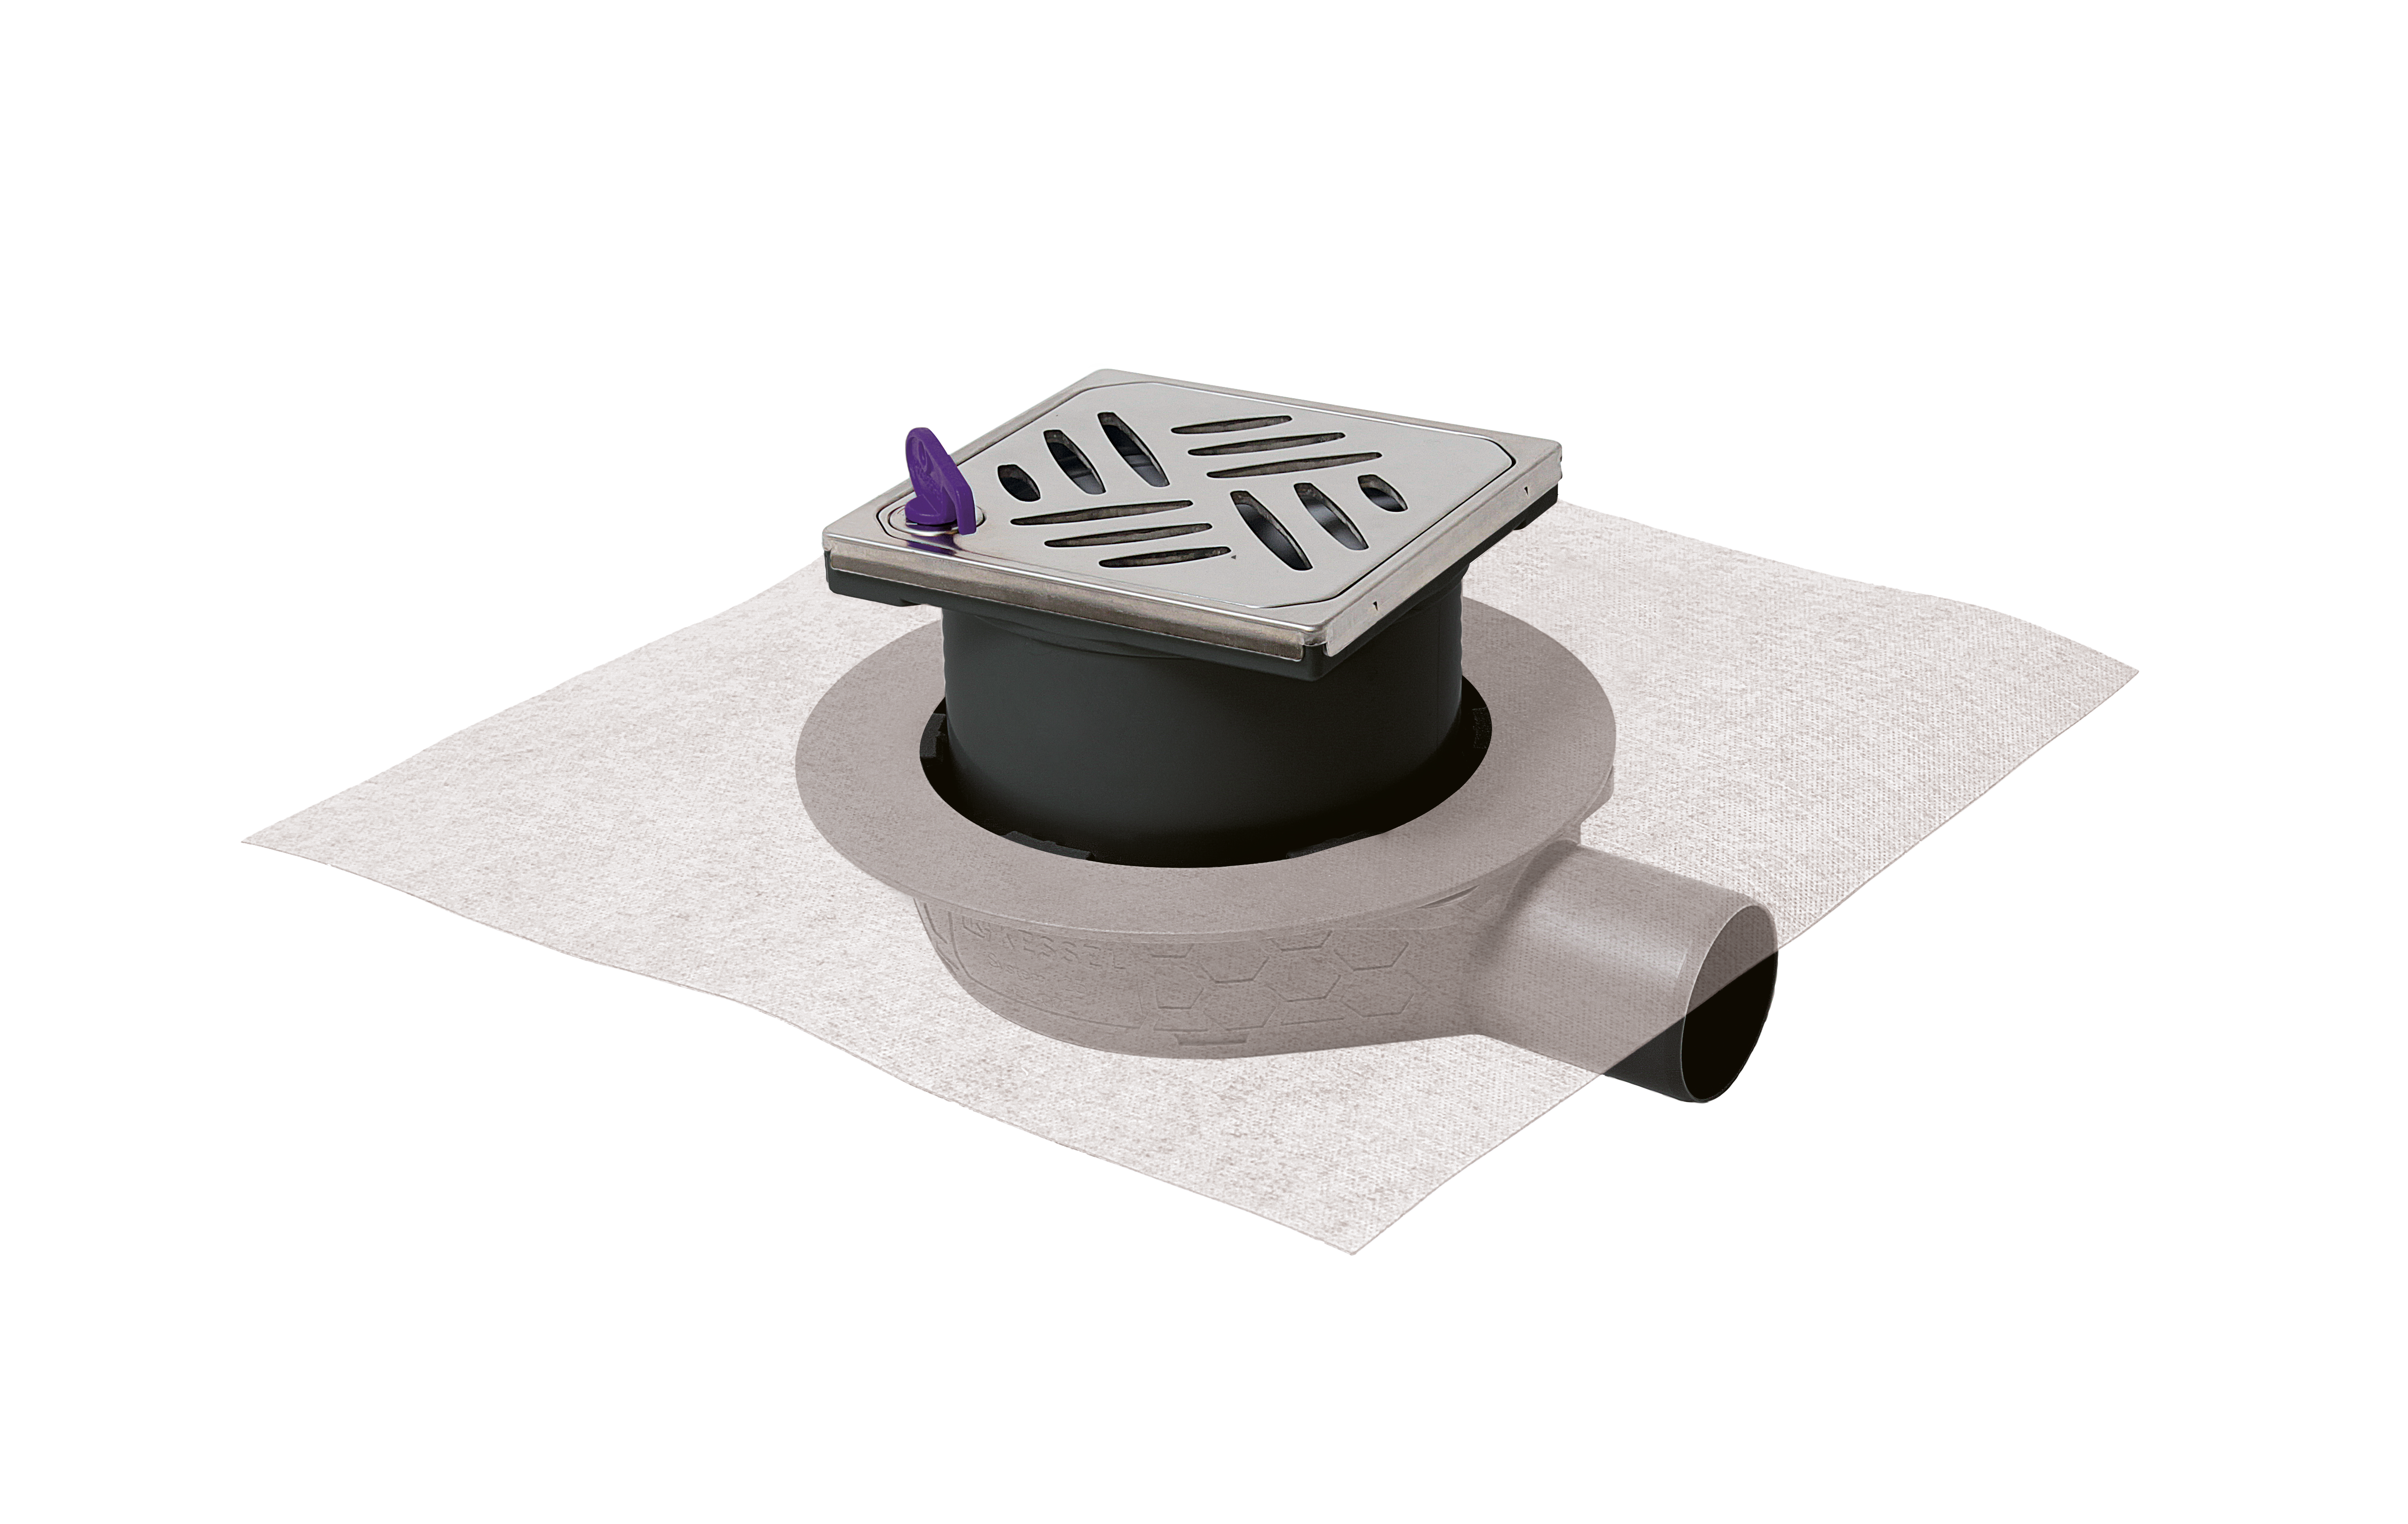 The Ultraflat 54 bathroom drain with a Kessel design cover and Lock & Lift locking system